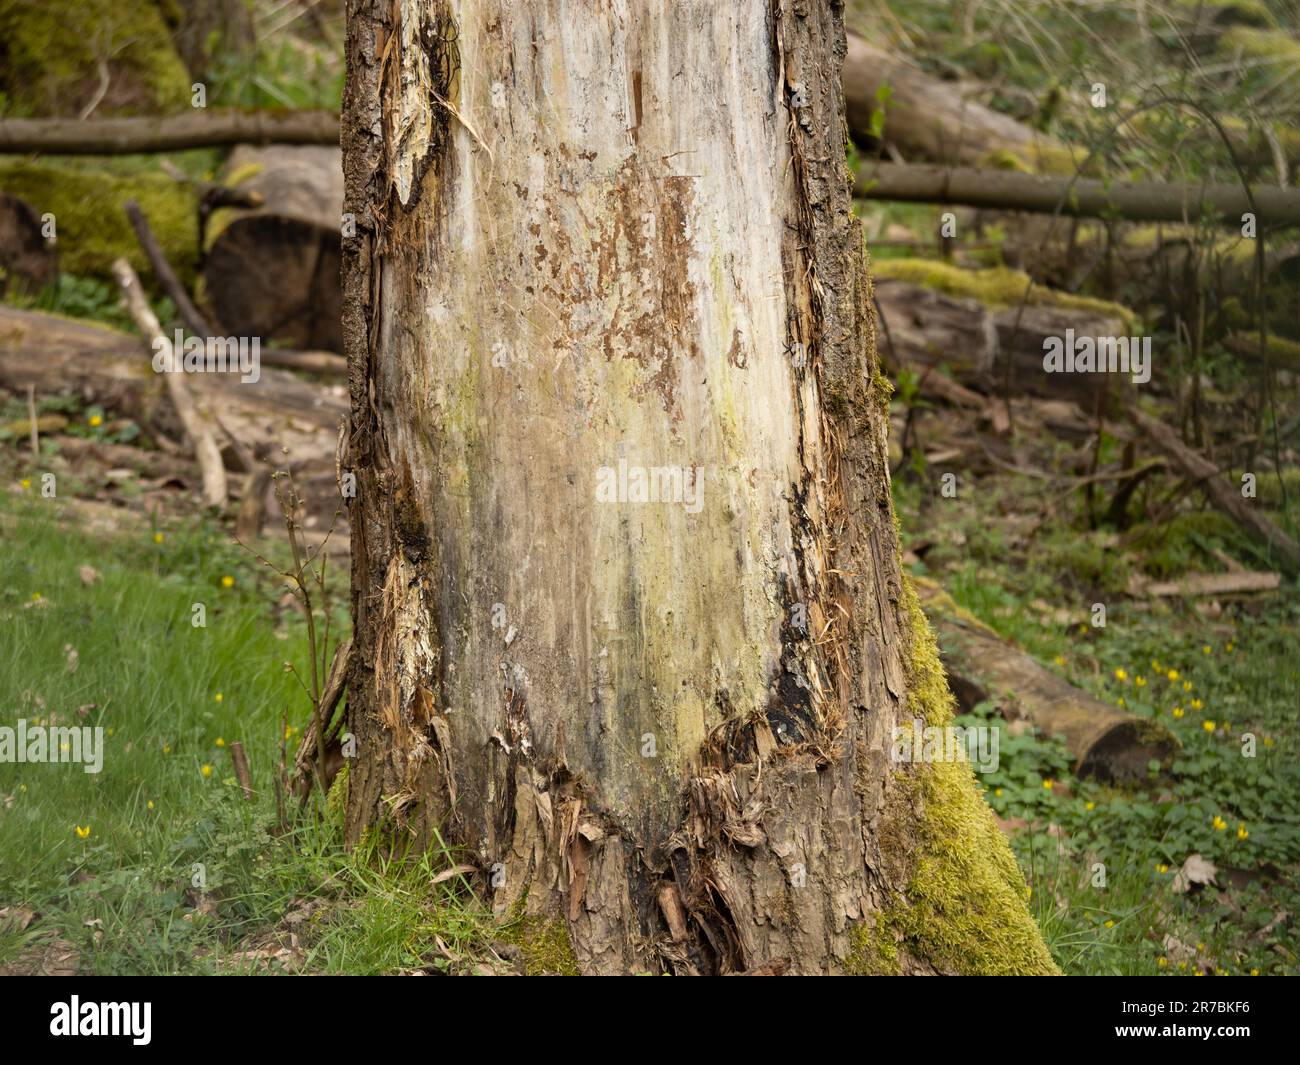 Scratched tree bark by an eurasian brown bear. Territory of an Ursus arctos in a forest. Marked tree with traces of a big male bear. Stock Photo